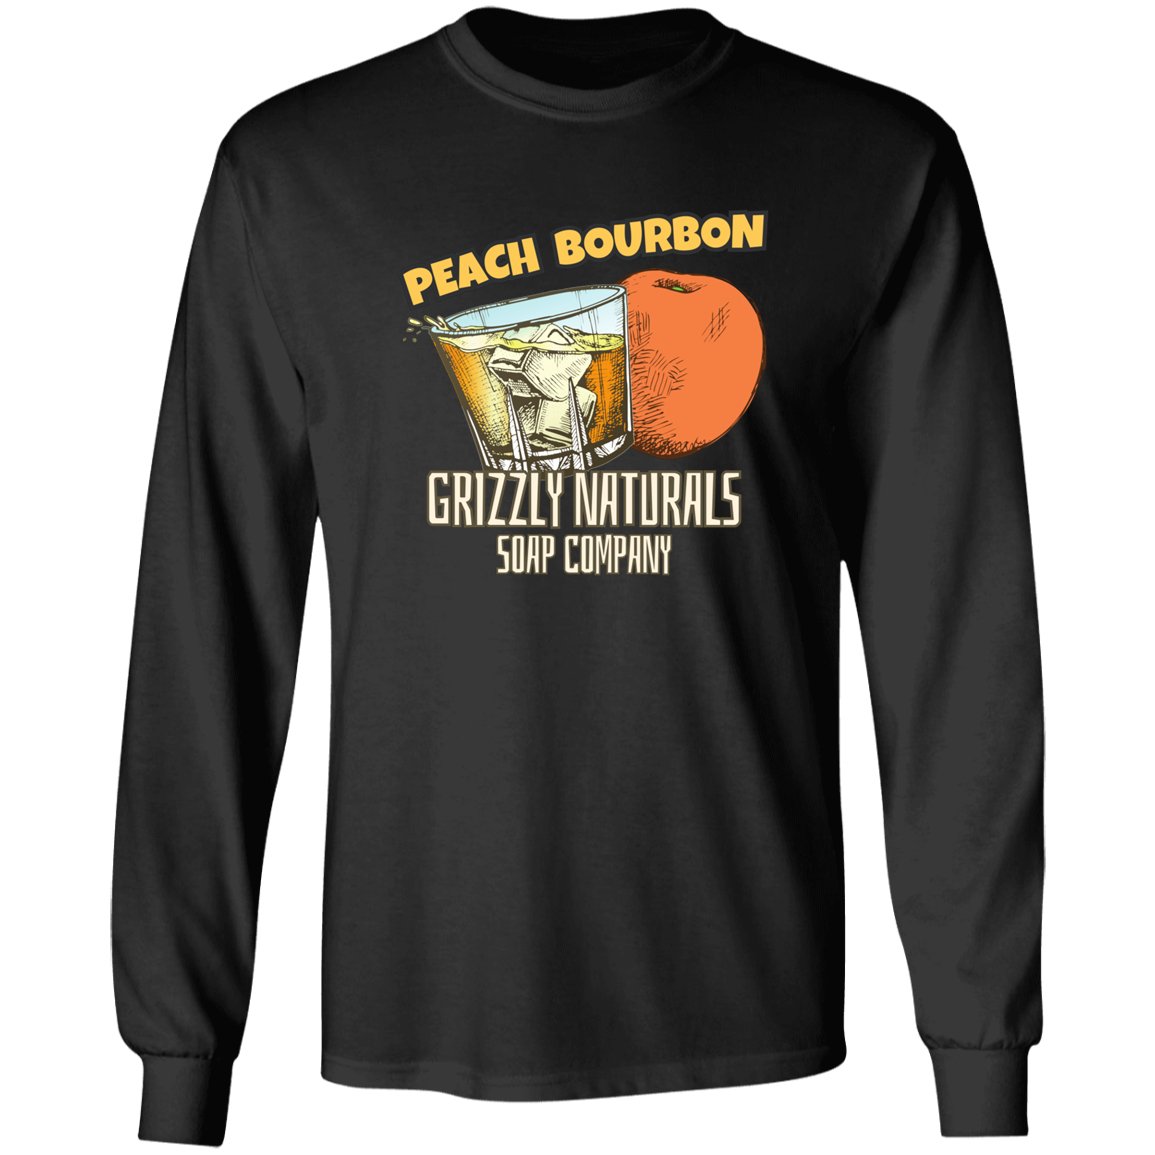 Grizzly Naturals Apparel - Peach Bourbon - Grizzly Naturals Soap Company